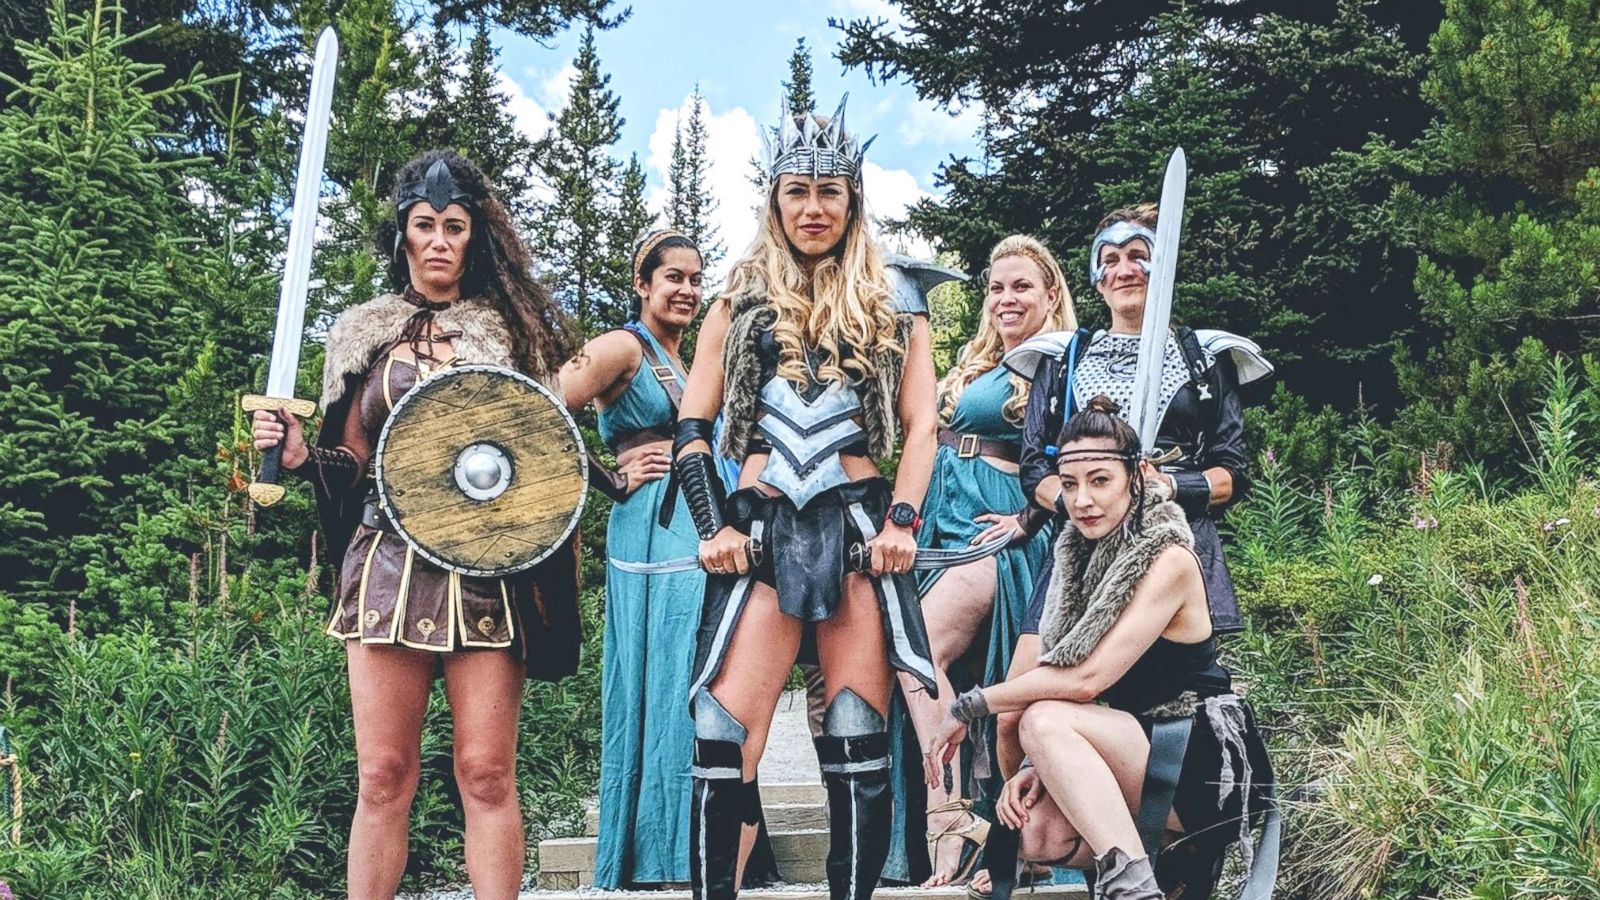 this 'warrior women'-themed bachelorette party is everything - abc news